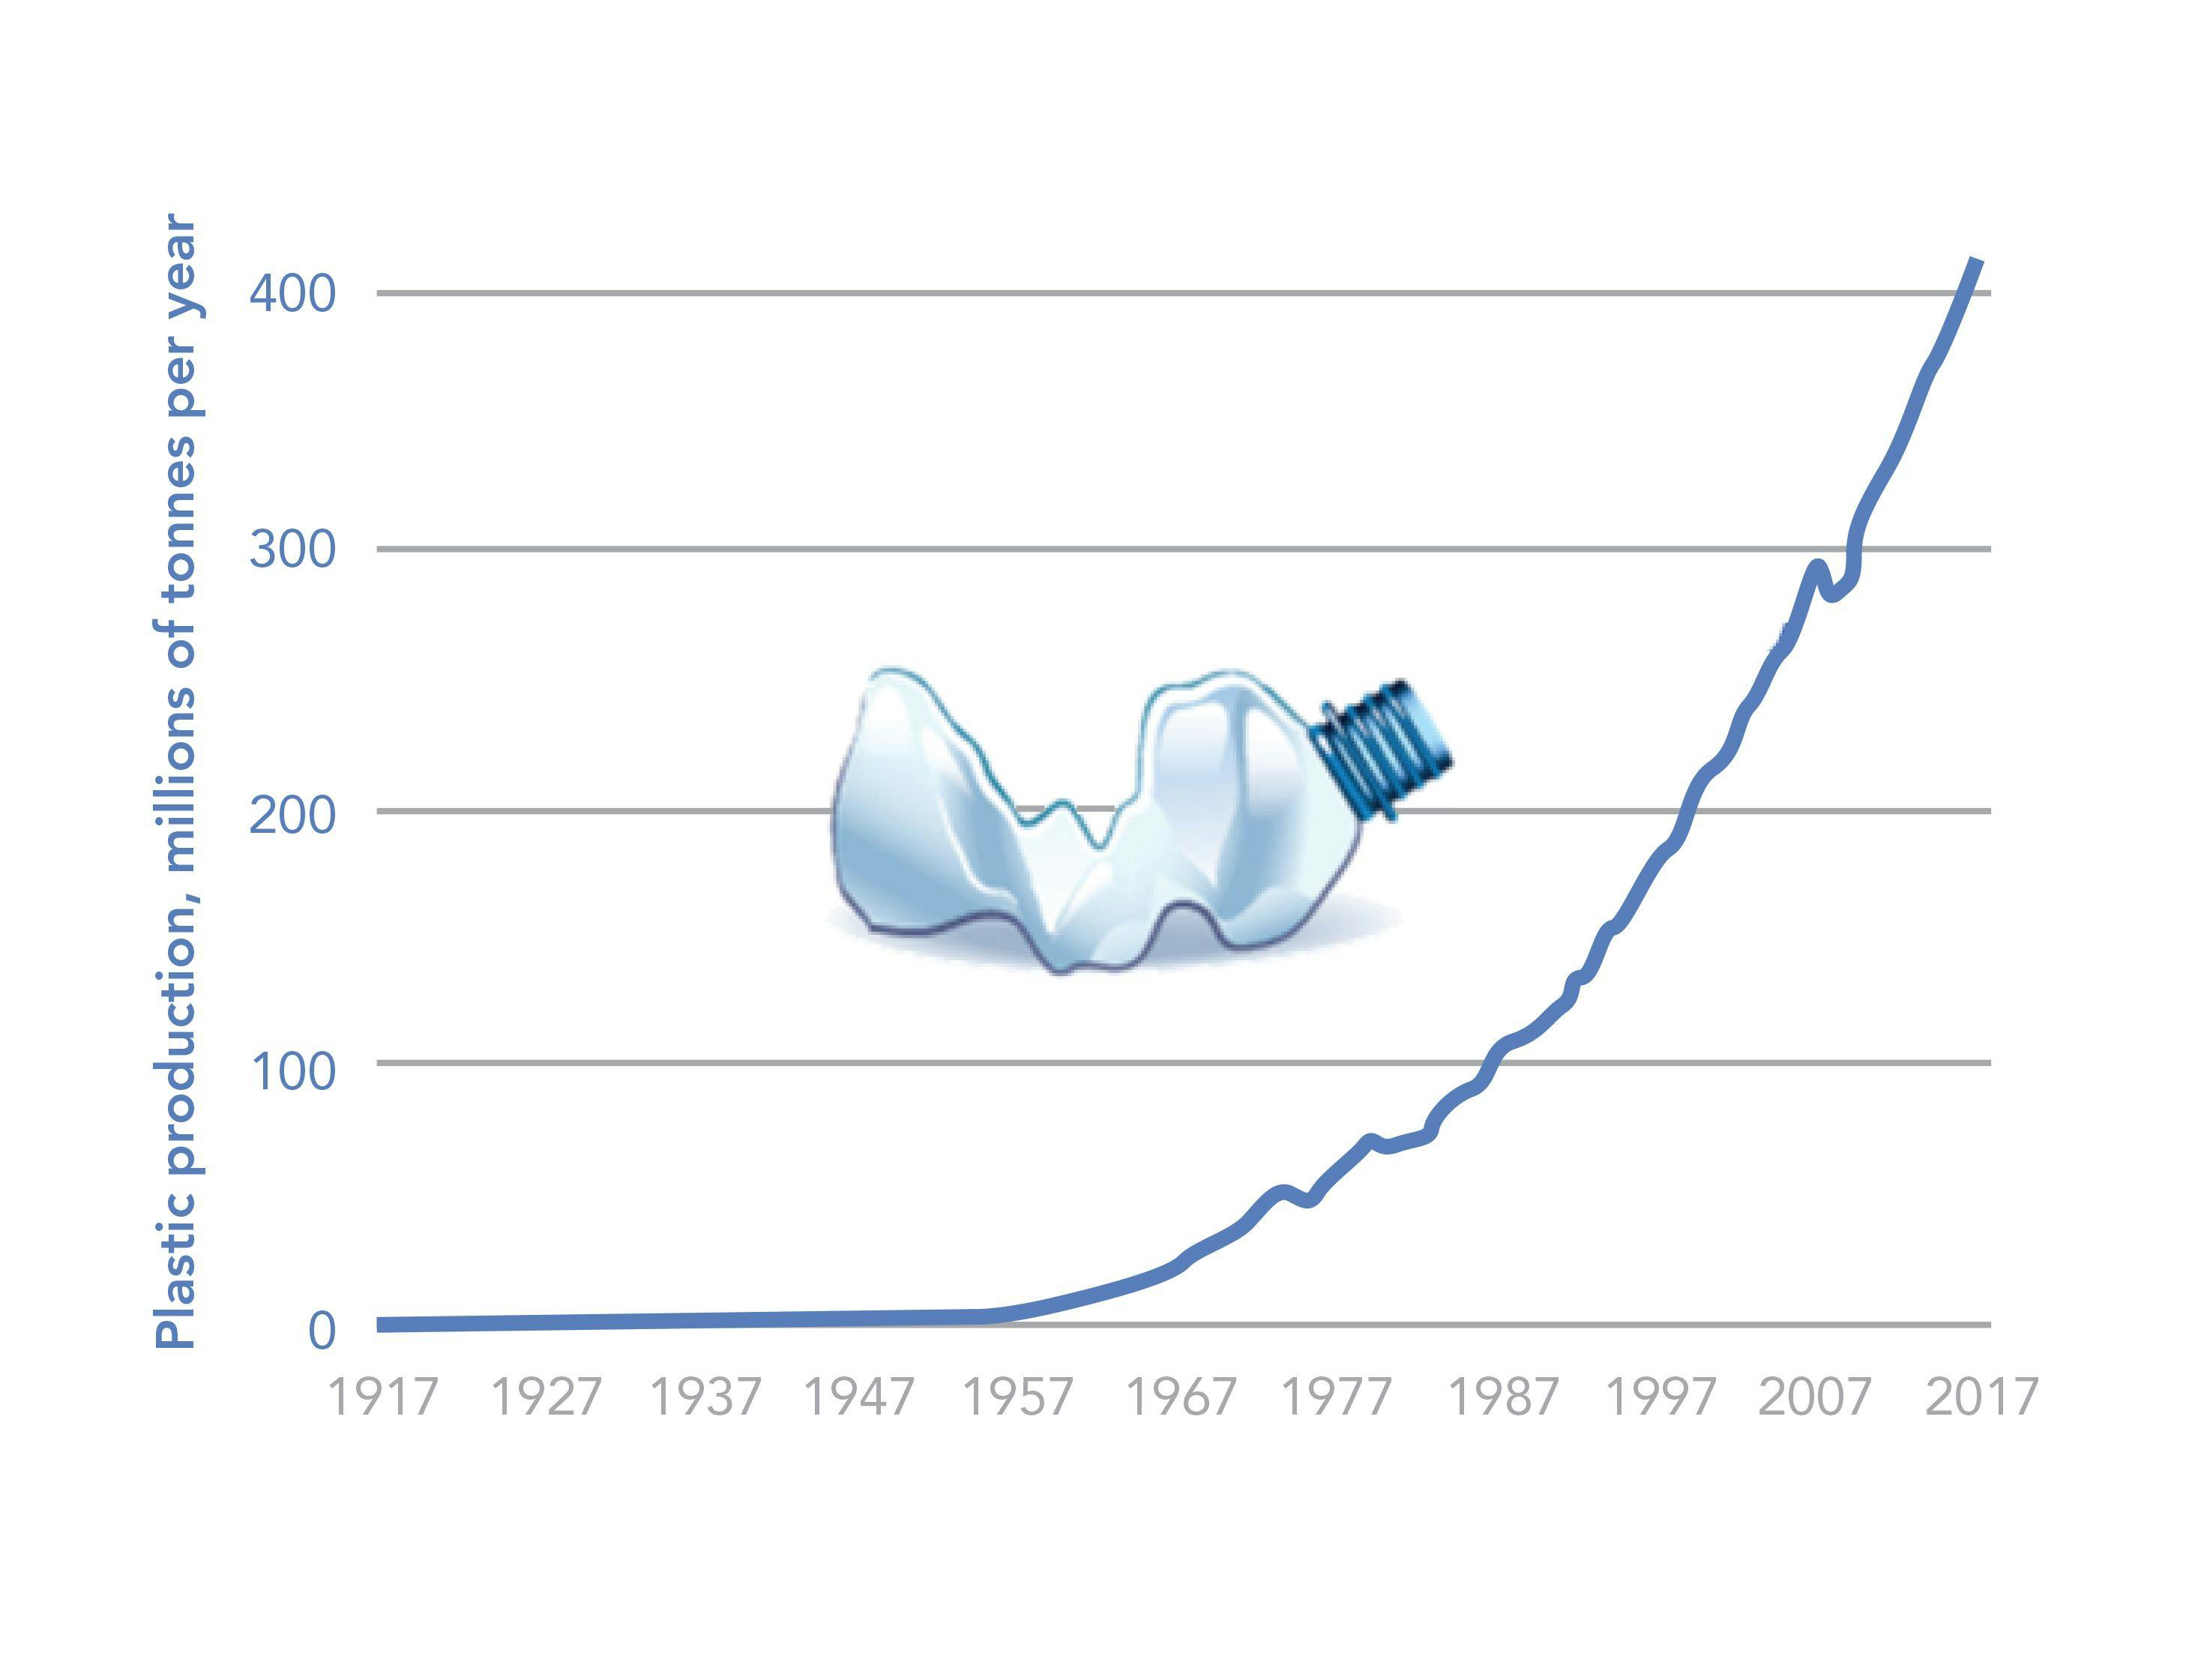 FIGURE 1: Yearly global plastic production.